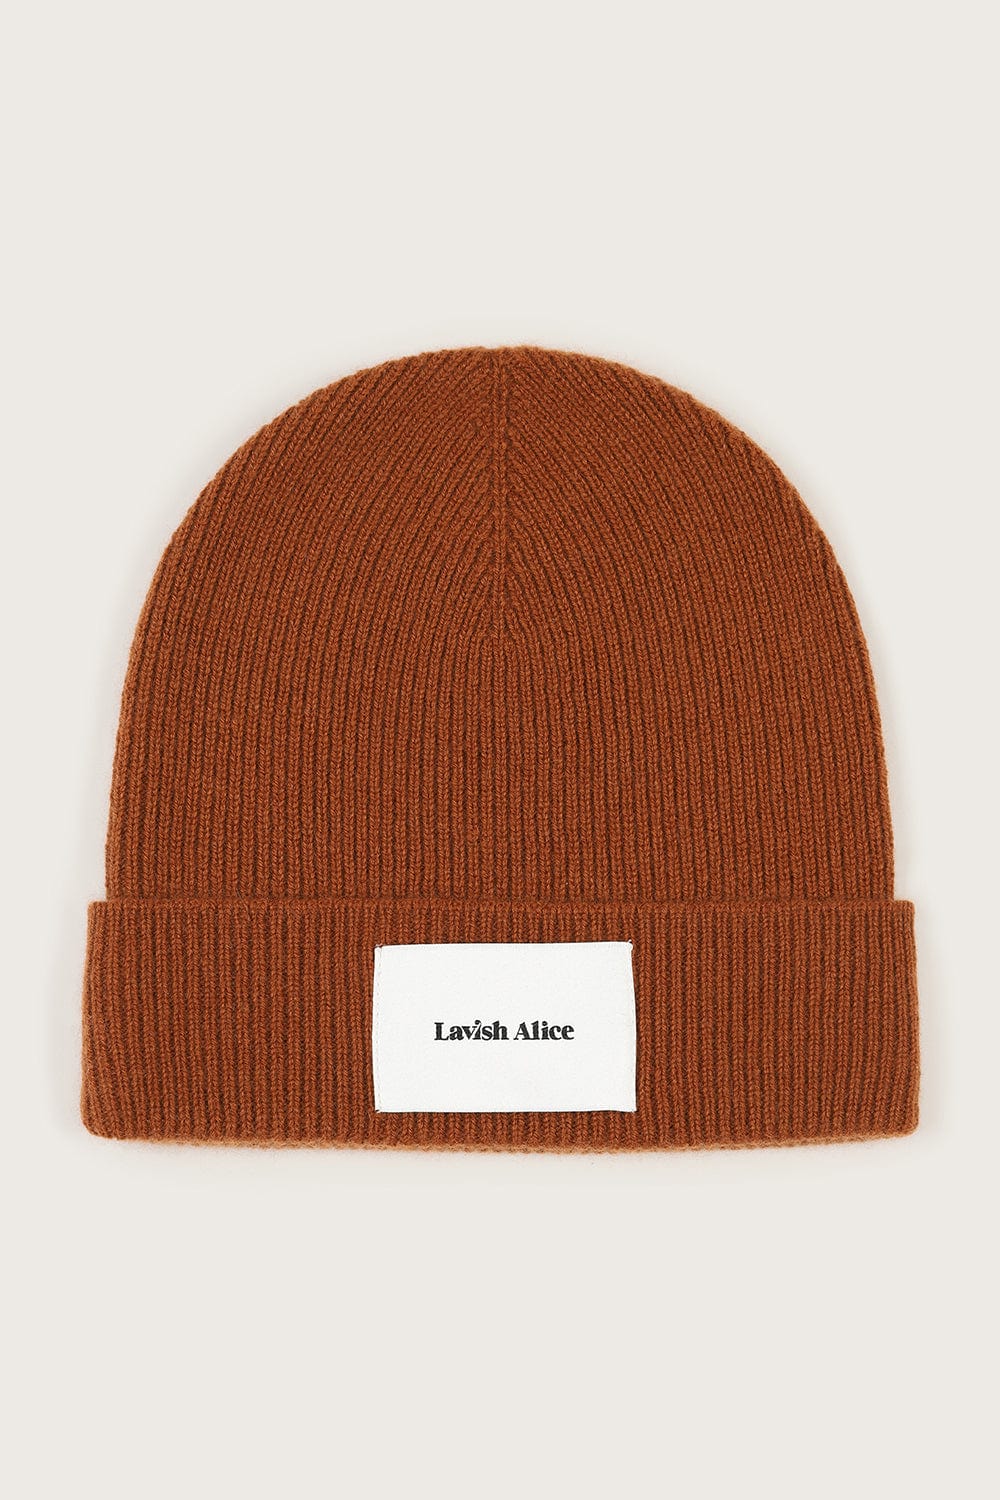 EZRA Knitted Cashmere Blend Beanie in Camel